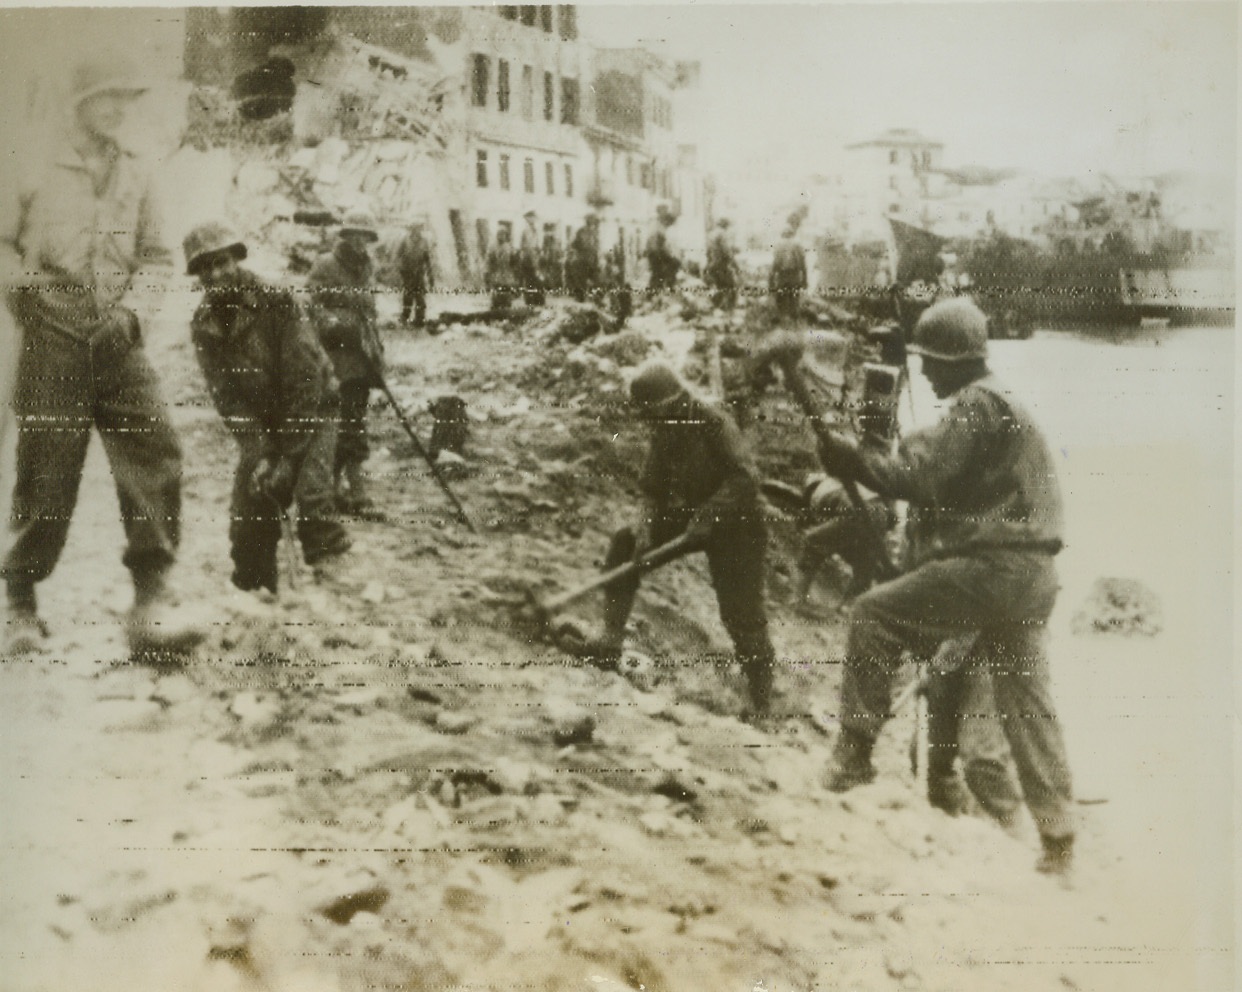 Anzio, Italy, 1/26/1944. American soldiers remove depth charges and demolition bombs planted by the Germans, along the beach at Anzio, one of the points where streams of men and material are pouring ashore for the Allied march on Rome. When Allied forces made their surprise bypass landings near Anzio, Germans tried to demolish harbor installations in the city but were not entirely successful. Note some buildings (background of photo) showing damage. Photo was flashed to New York by radio tonight.  Credit:  (Stars and Stripes photo thru OWI radiophoto from ACME);